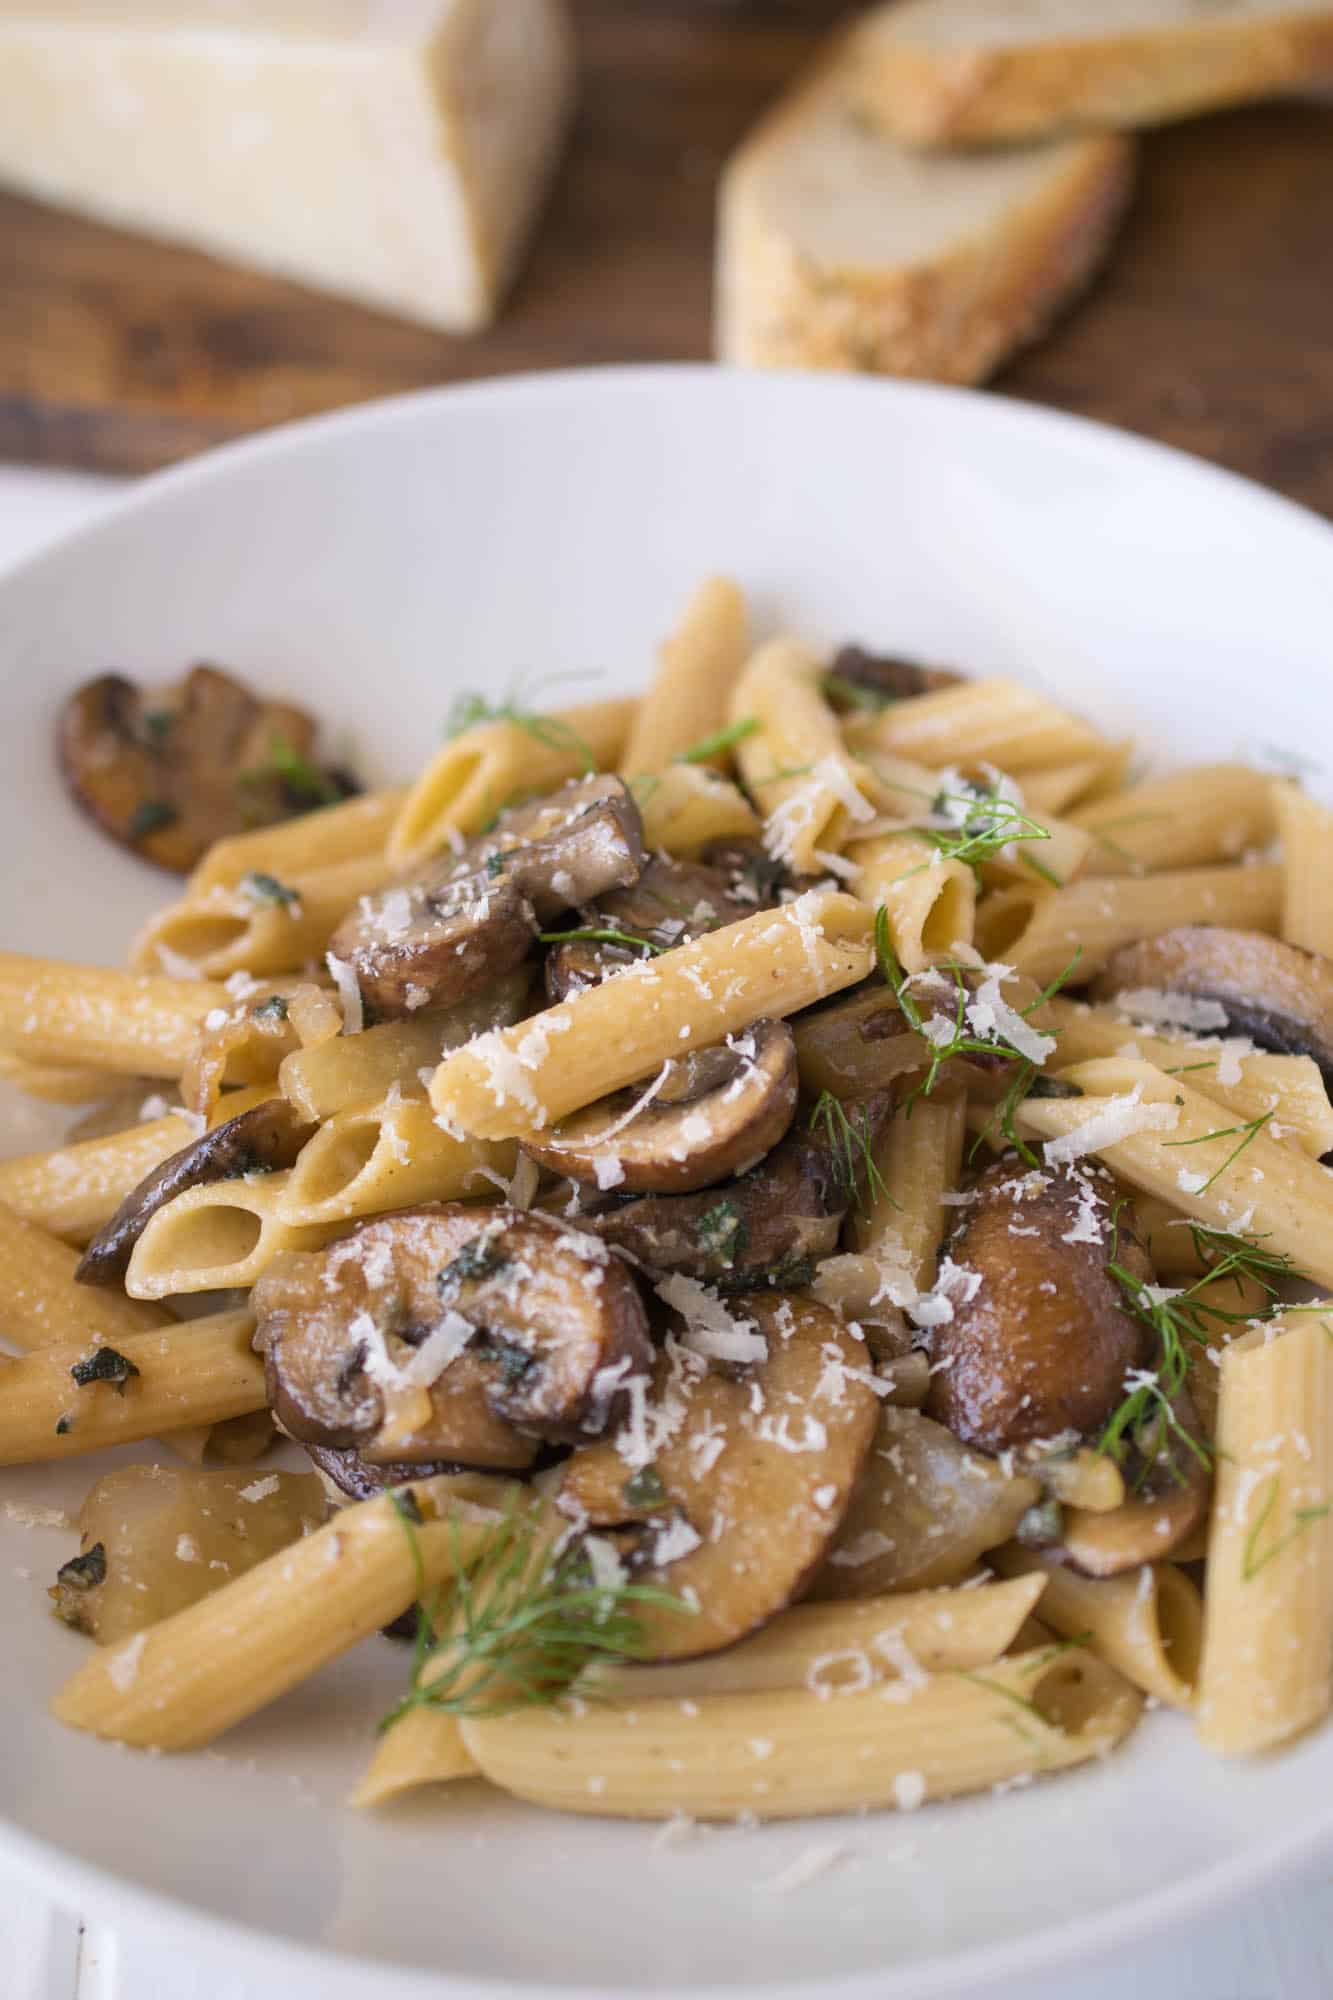 A closeup showing all the meaty mushrooms and pasta